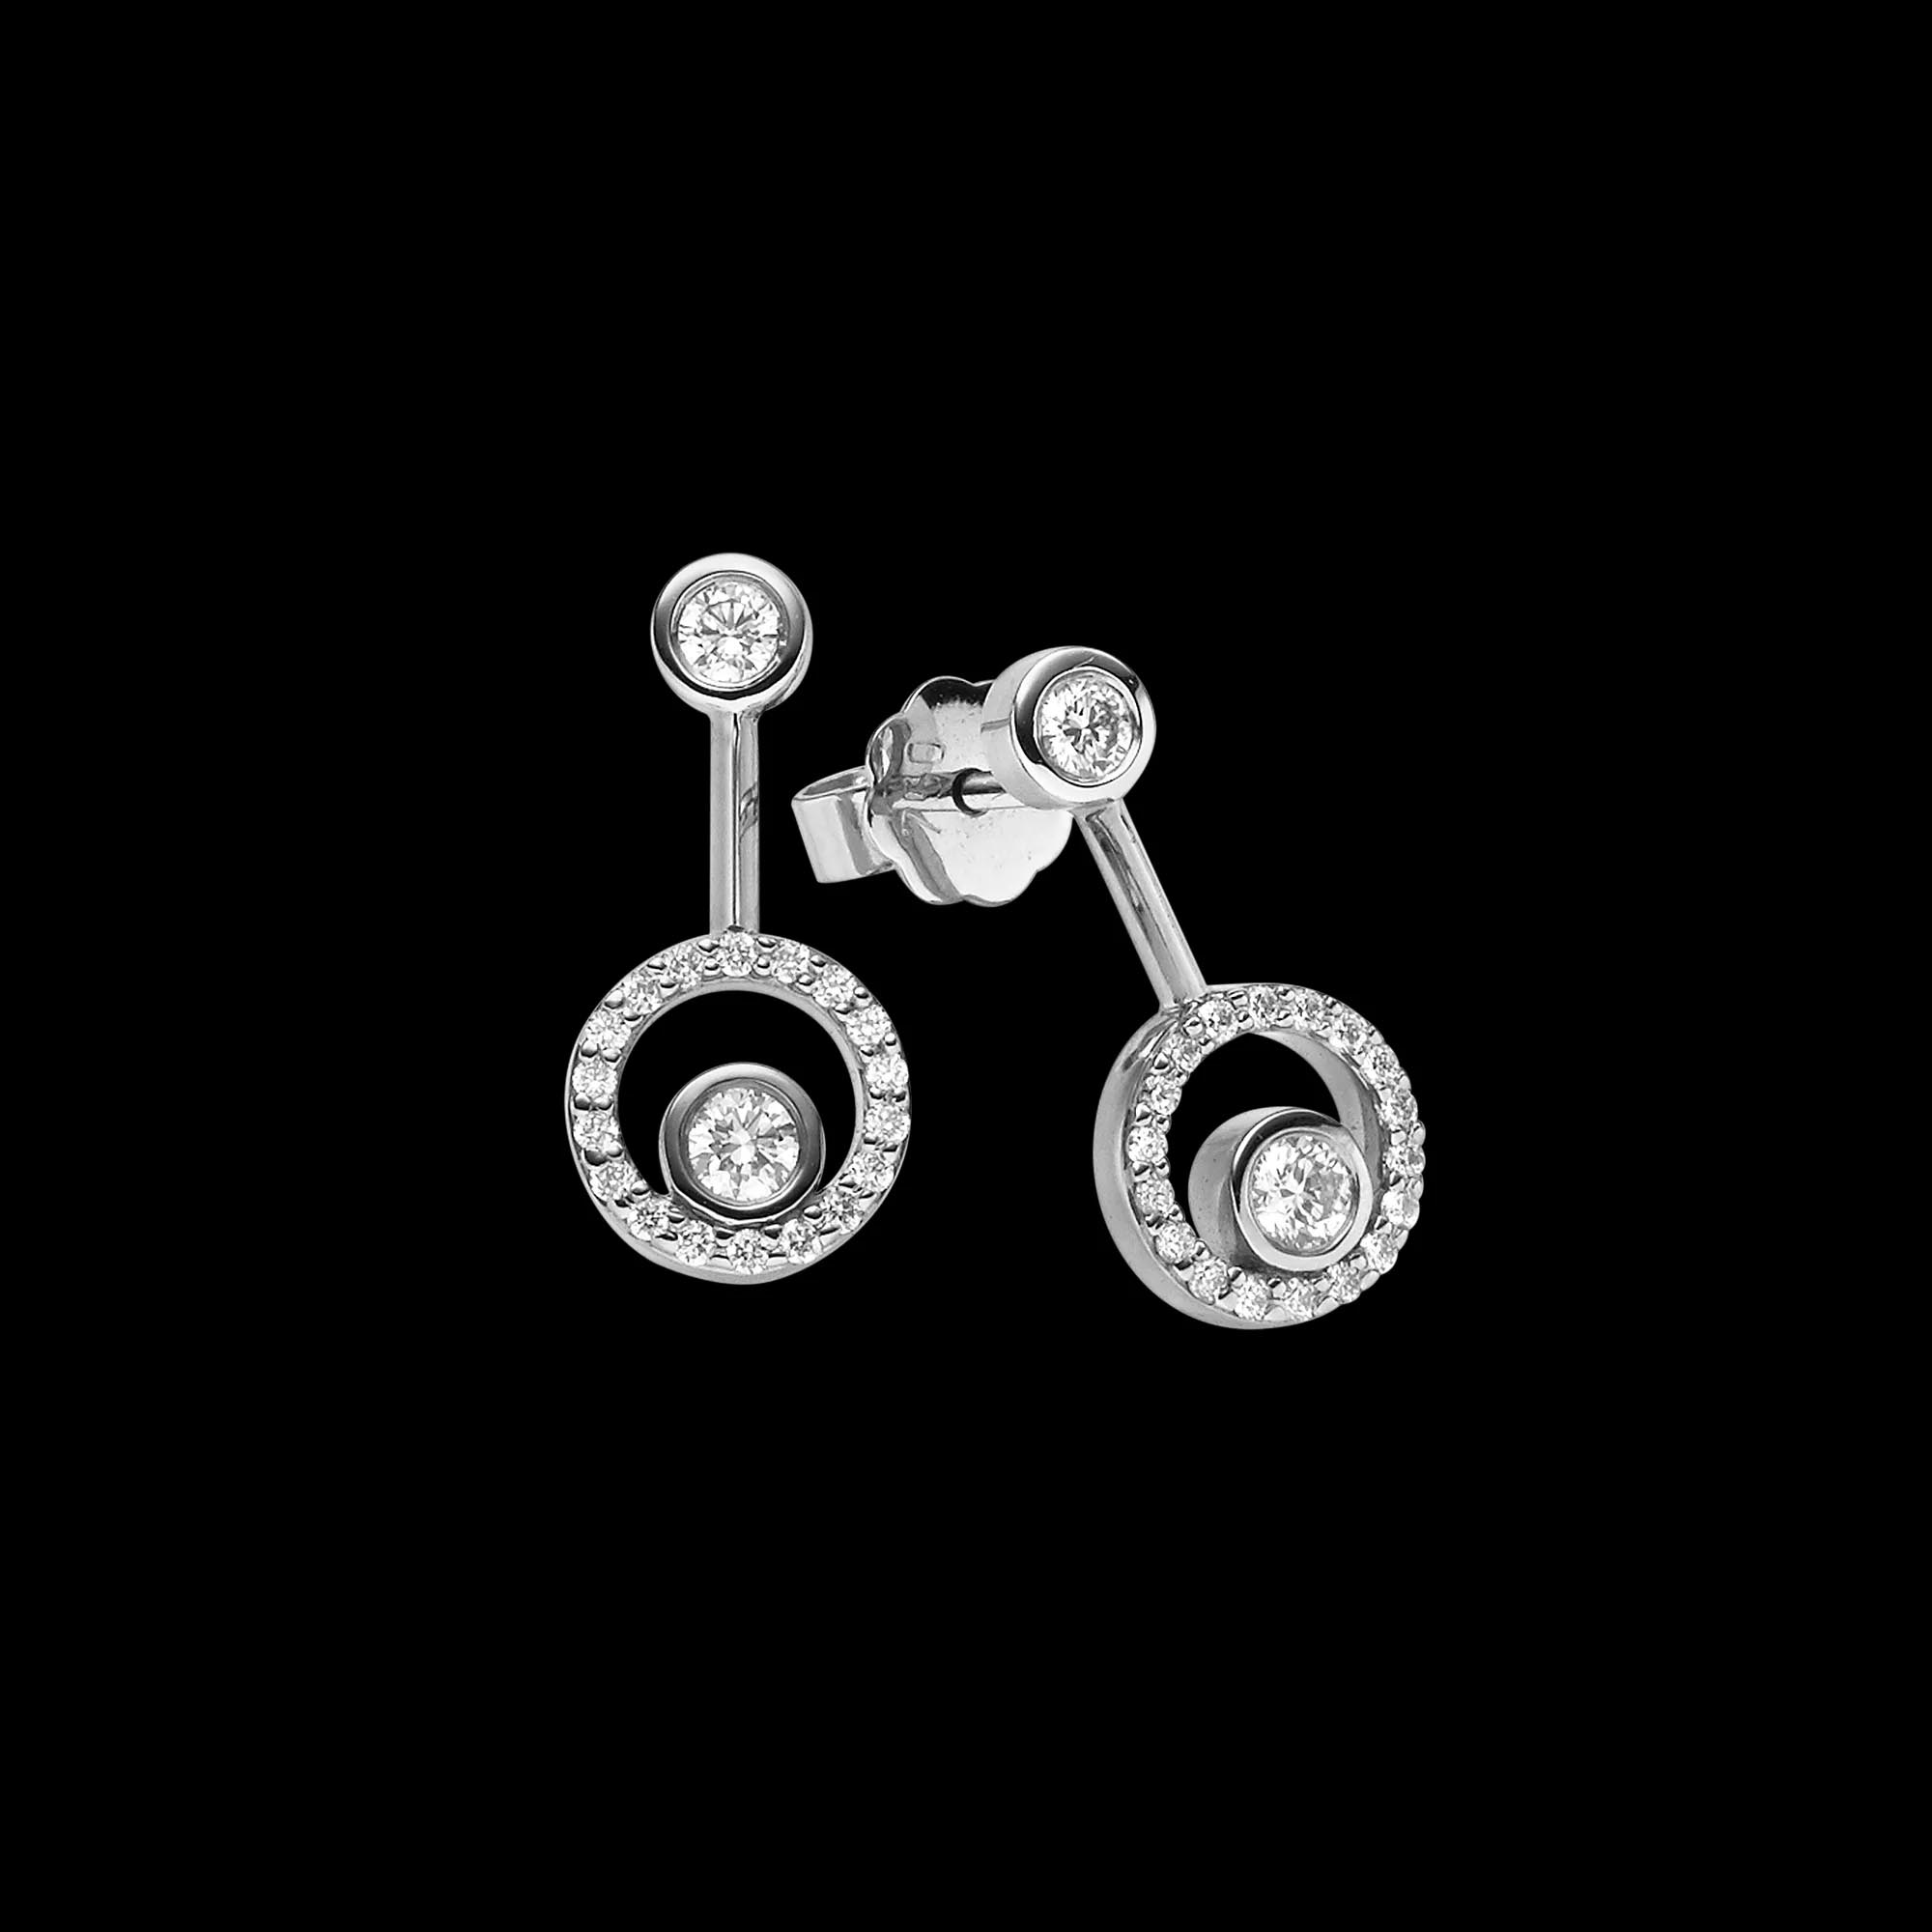 Wholesale OEM/ODM Jewelry OEM Sterling Silver Rhodium Plated CZ earrings customized jewelry supplier wholesale